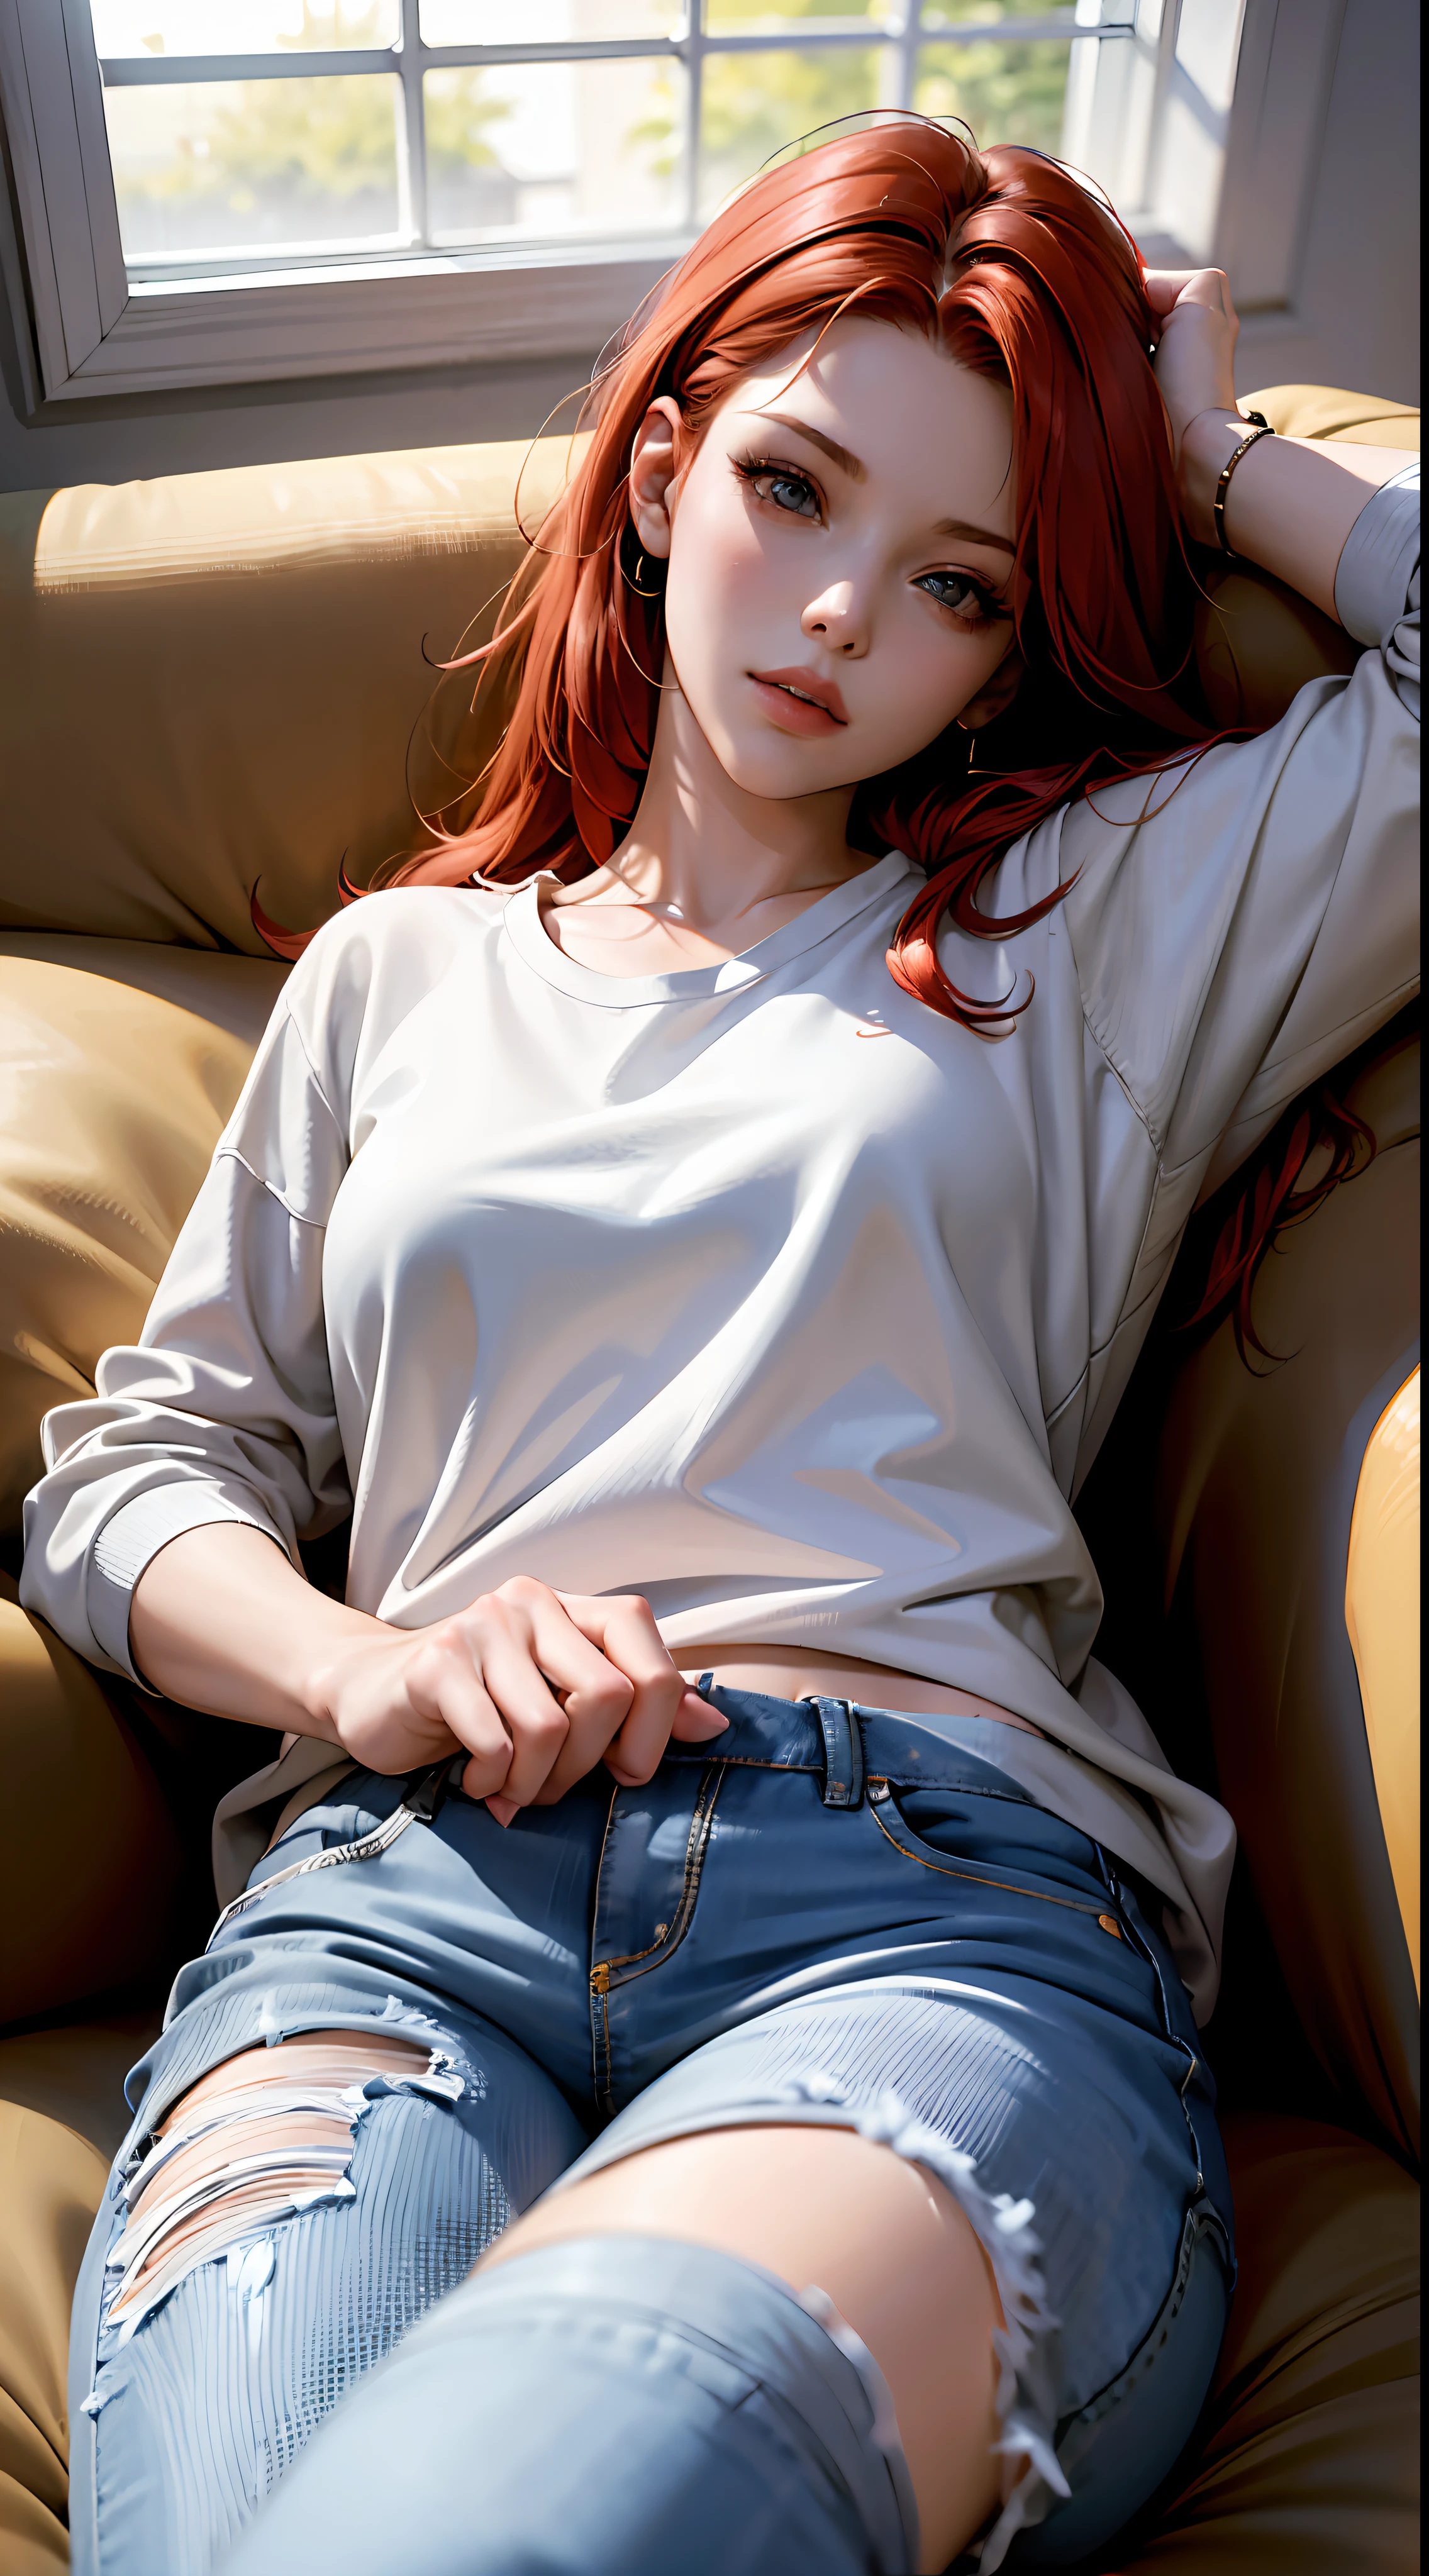 Masterpiece, best_quality, 1girl, solo, sleeping, lying on the couch, in white sweatshirt, long jeans, socks. red hair, perfect face, 4k, HDR, Full HD, HDR, proper lighting, late afternoon,